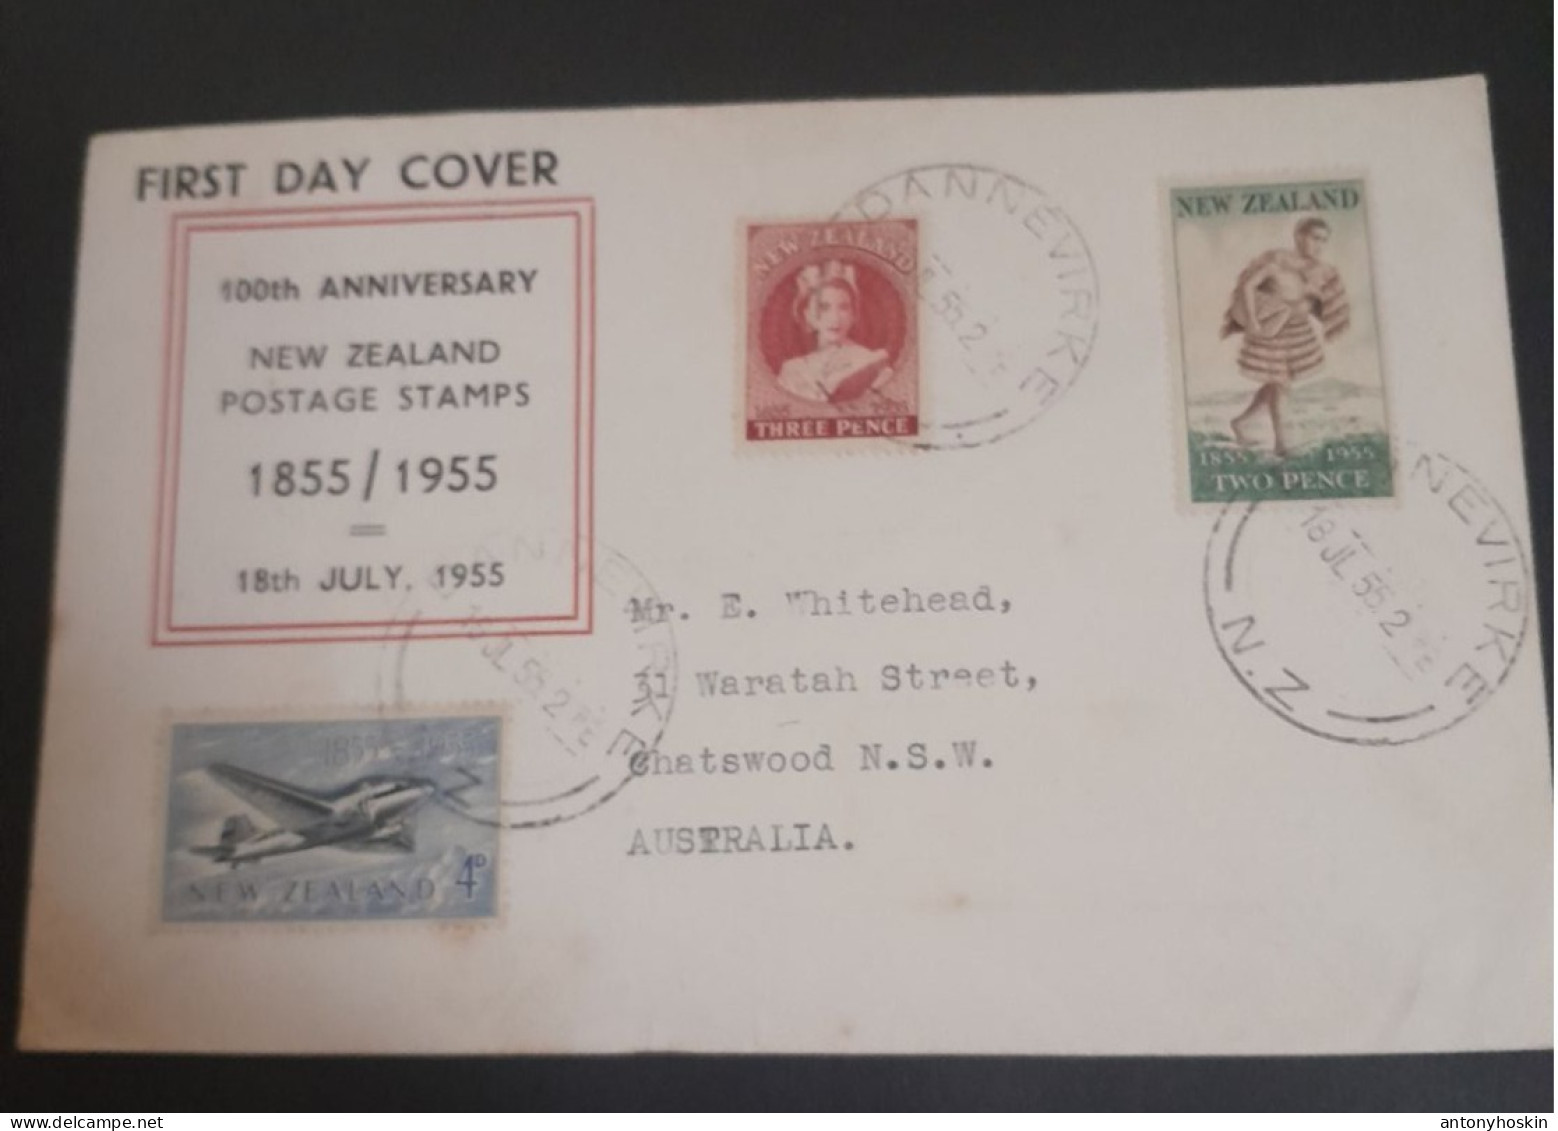 1855-1955 New Zealand Postage Stamps 100 Th Anniversary First Day Cover. - Cartas & Documentos